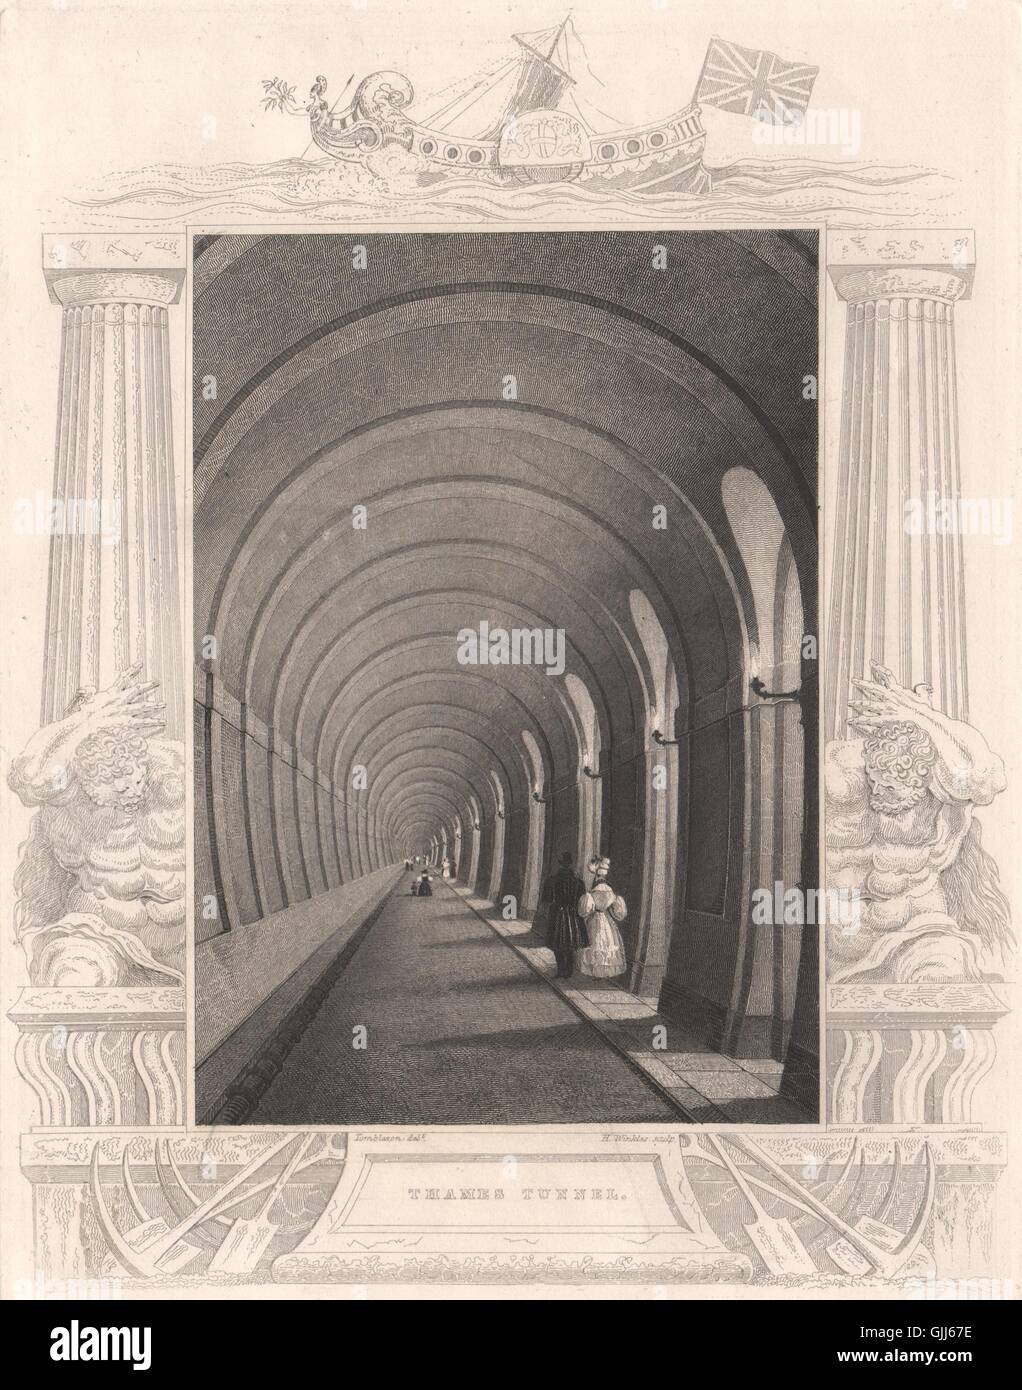 'Thames Tunnel'. London. Decorative view by William TOMBLESON, old print 1835 Stock Photo